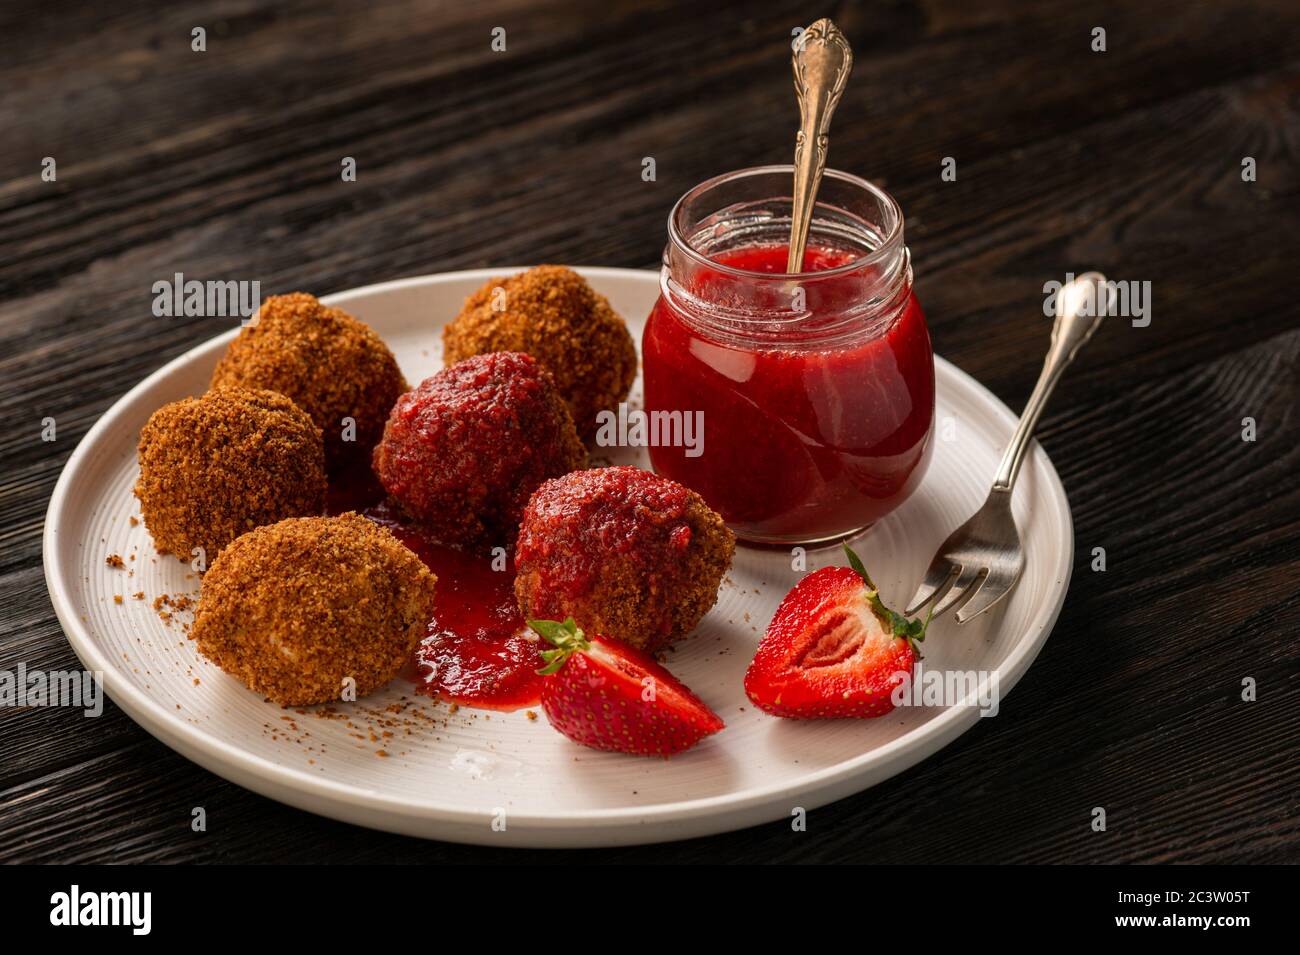 Homemade cottage cheese balls, hungarian sweet dessert served with strawberry mousse. Stock Photo